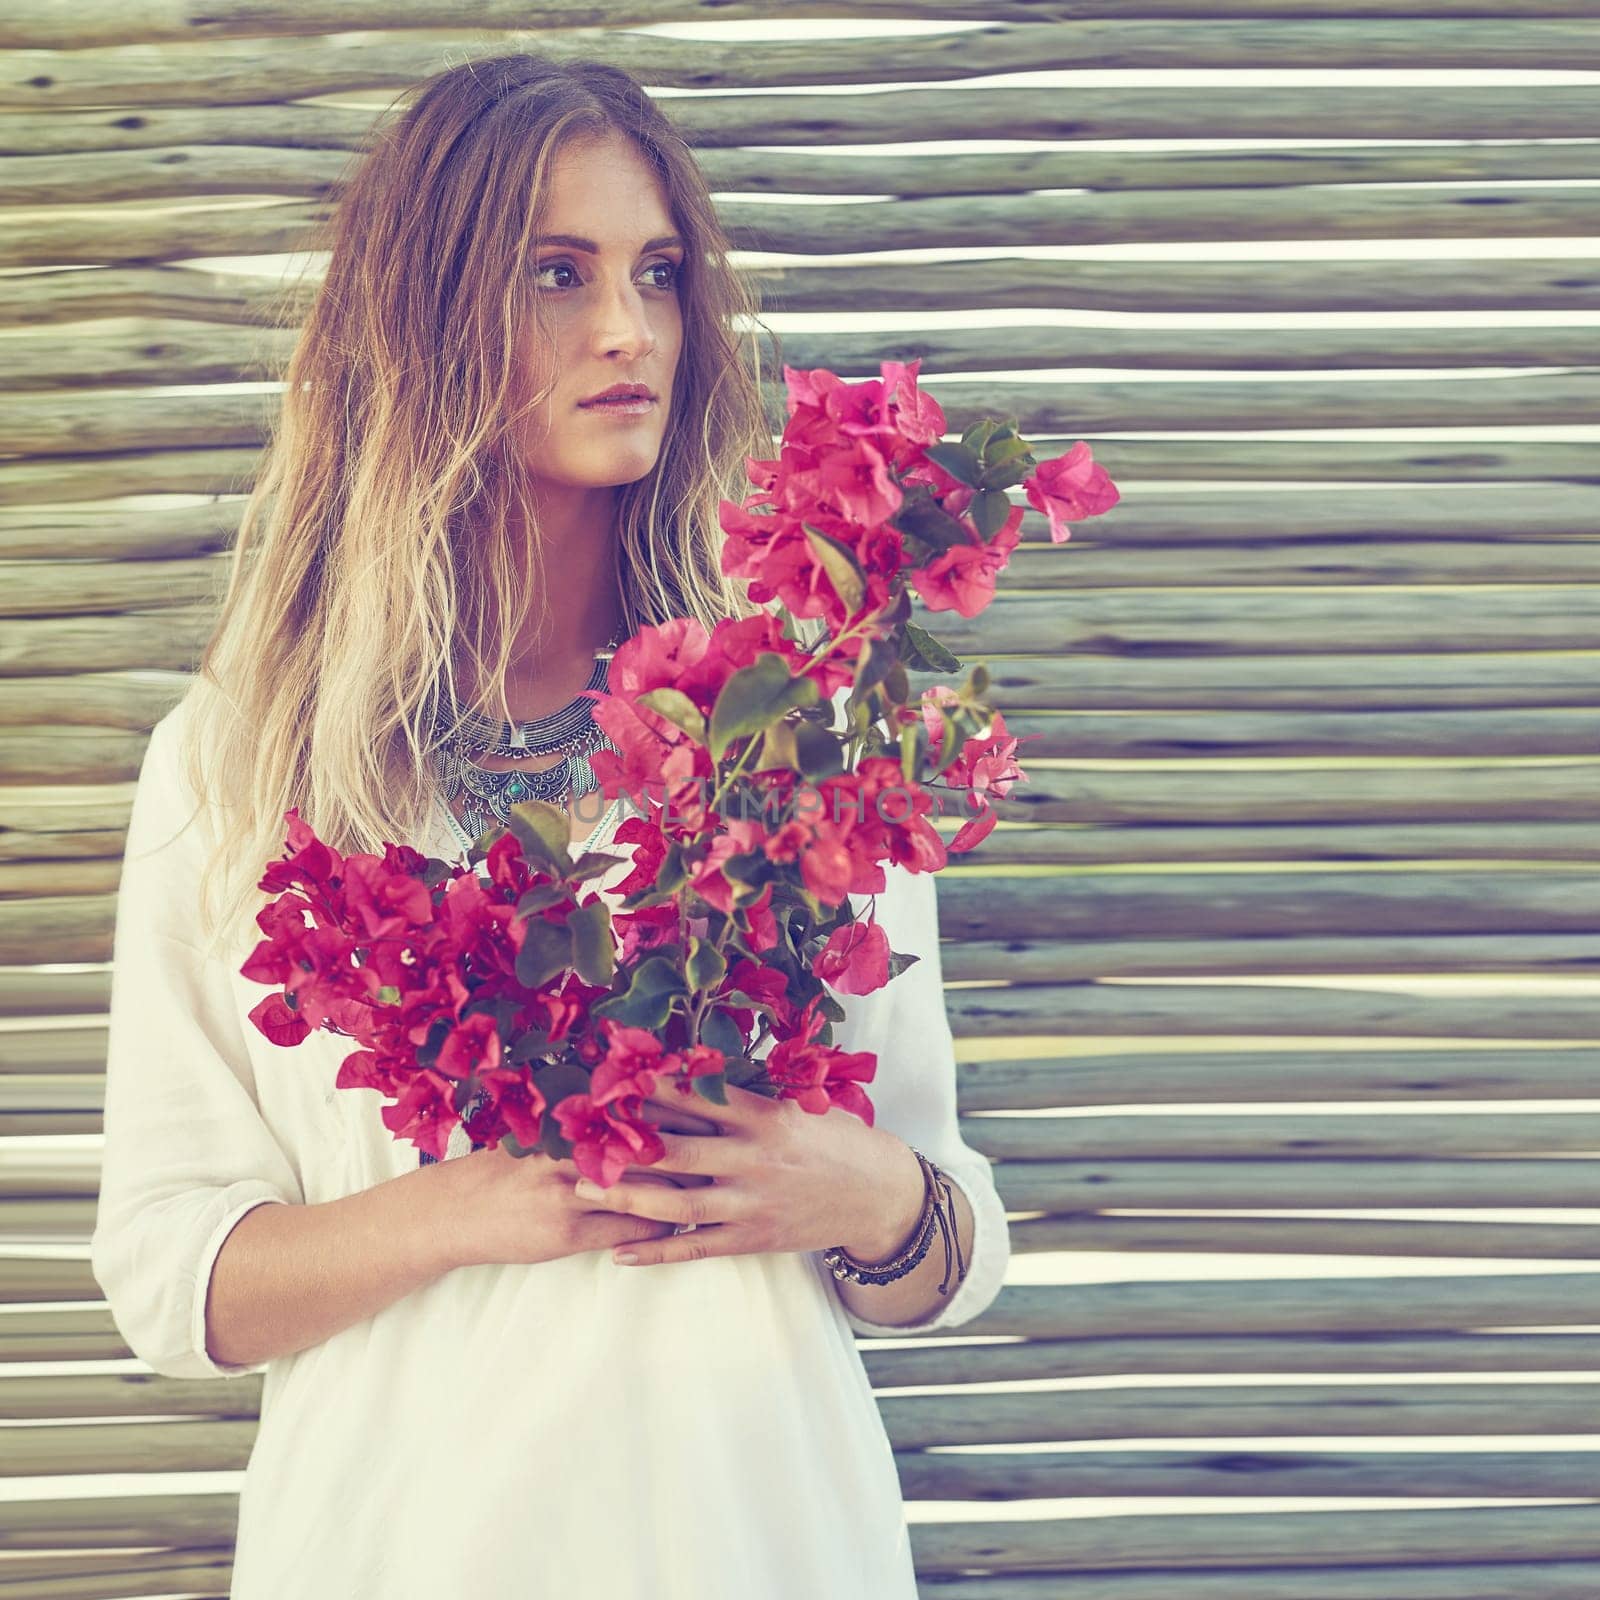 Making a fashion statement with flowers. an attractive young woman holding a bunch of fresh flowers. by YuriArcurs